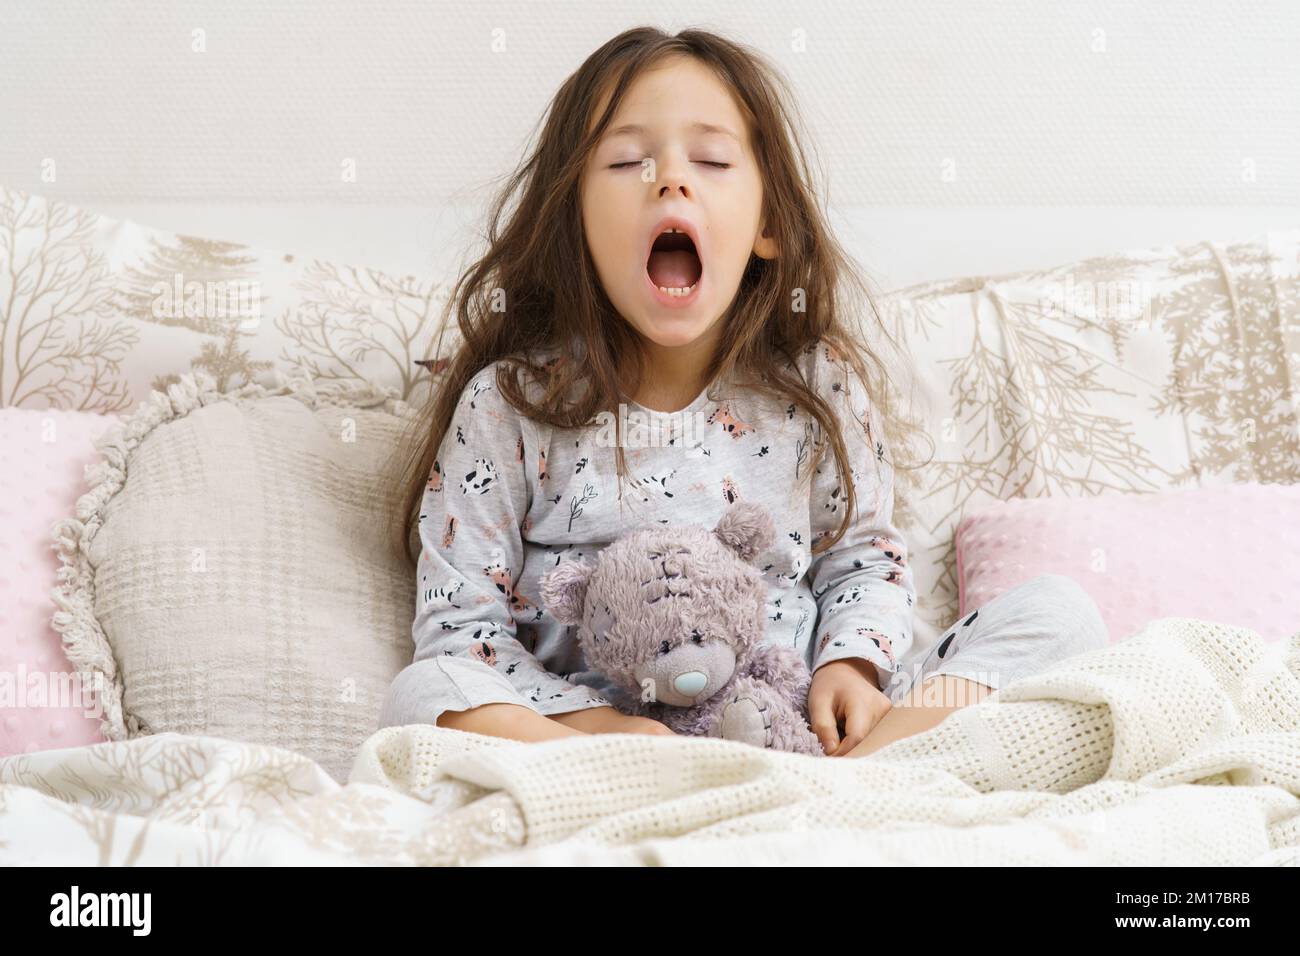 Funny, cute, tired little brunette girl yawning with open mouth, carrying teddy bear toy, sit on soft bed with pillows on white background. Broken sle Stock Photo